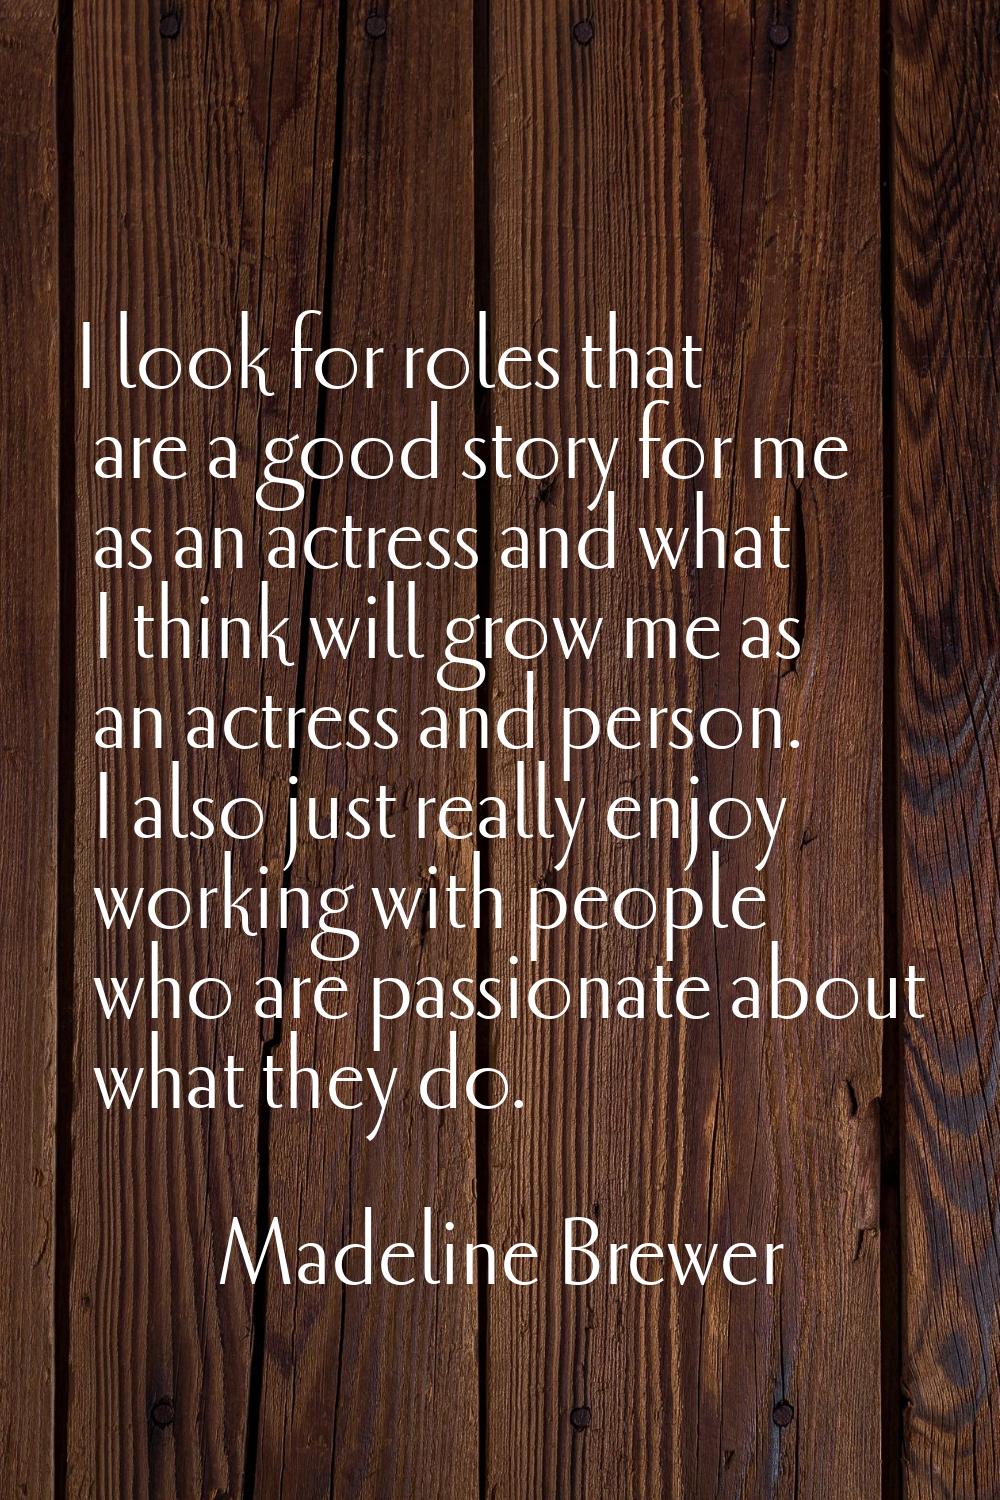 I look for roles that are a good story for me as an actress and what I think will grow me as an act